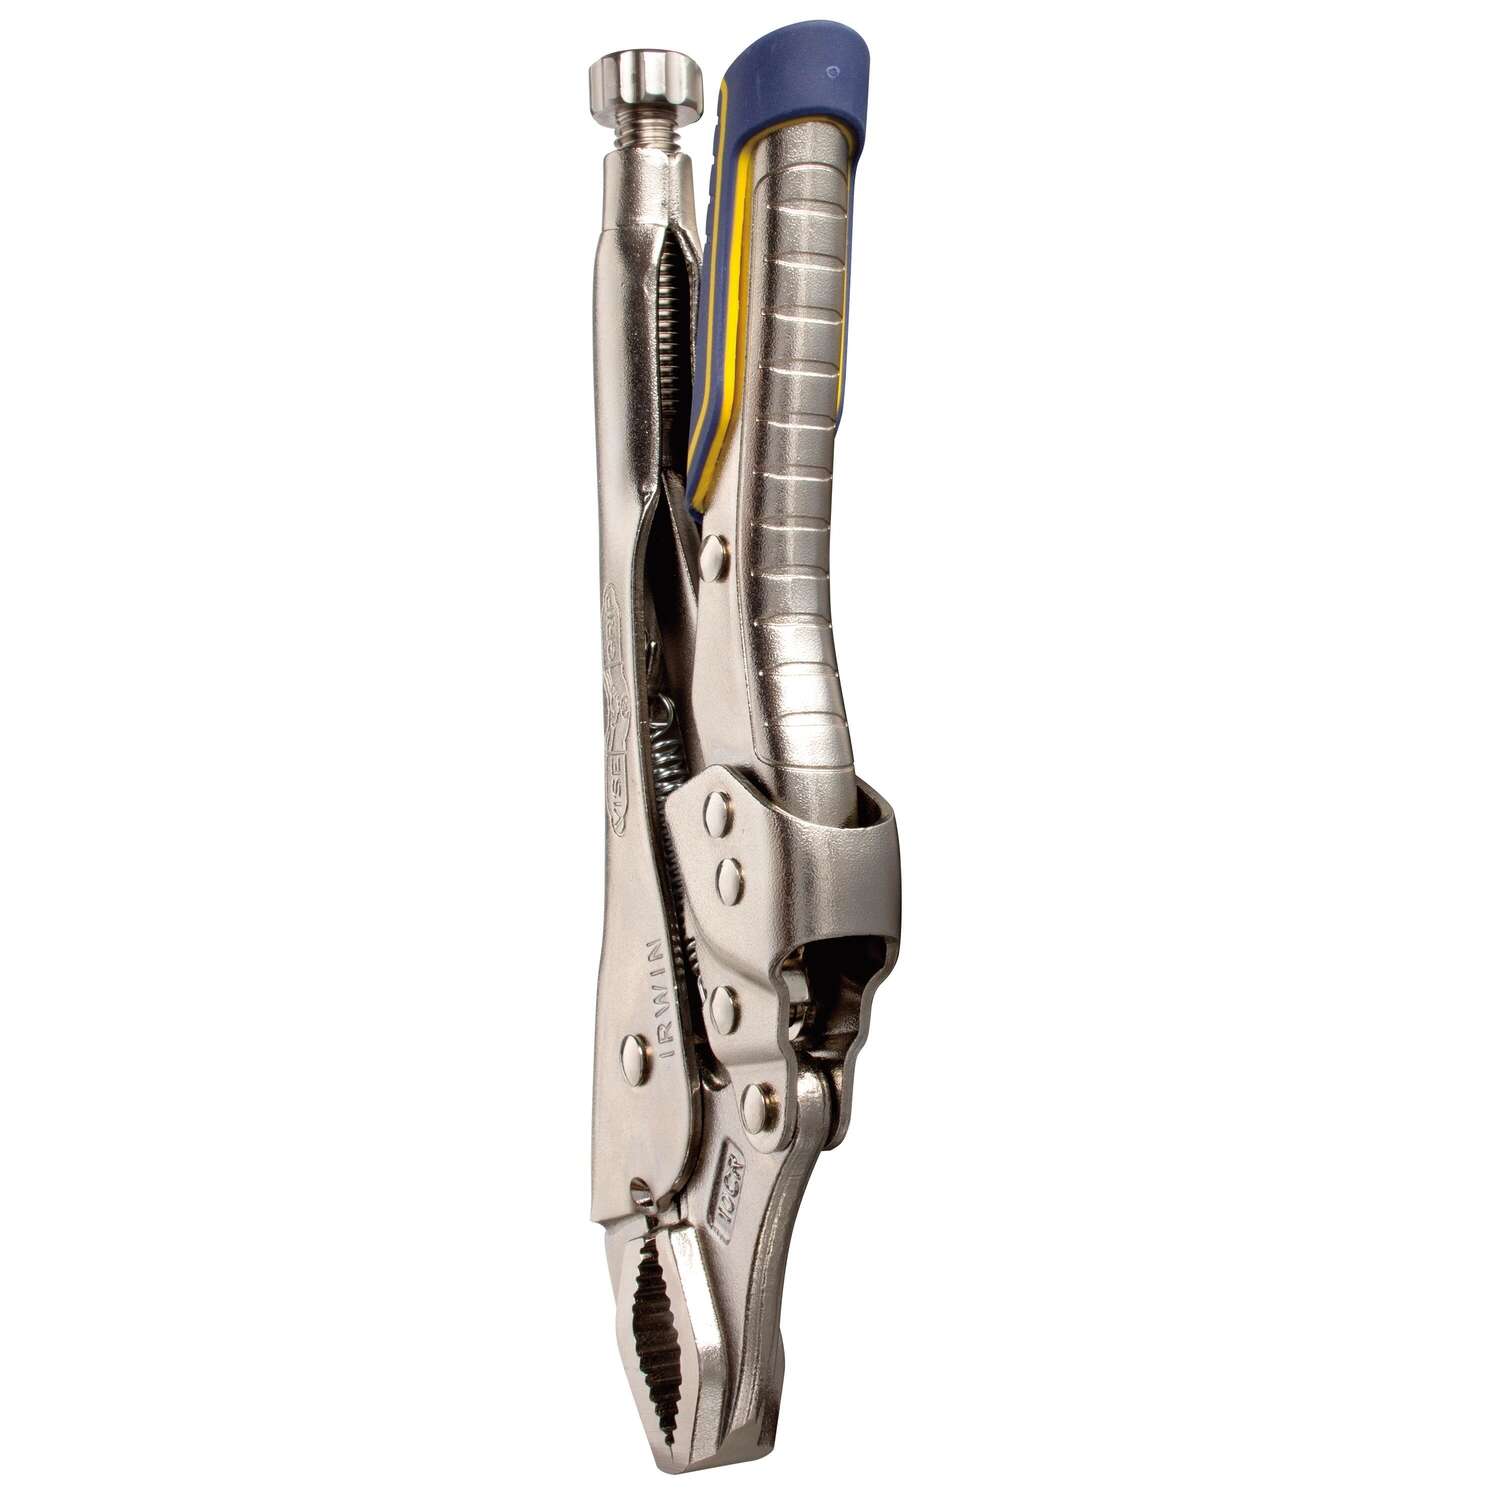 Vise Grip 10CR 10-Inch Adjustable Curved Jaw Locking Pliers